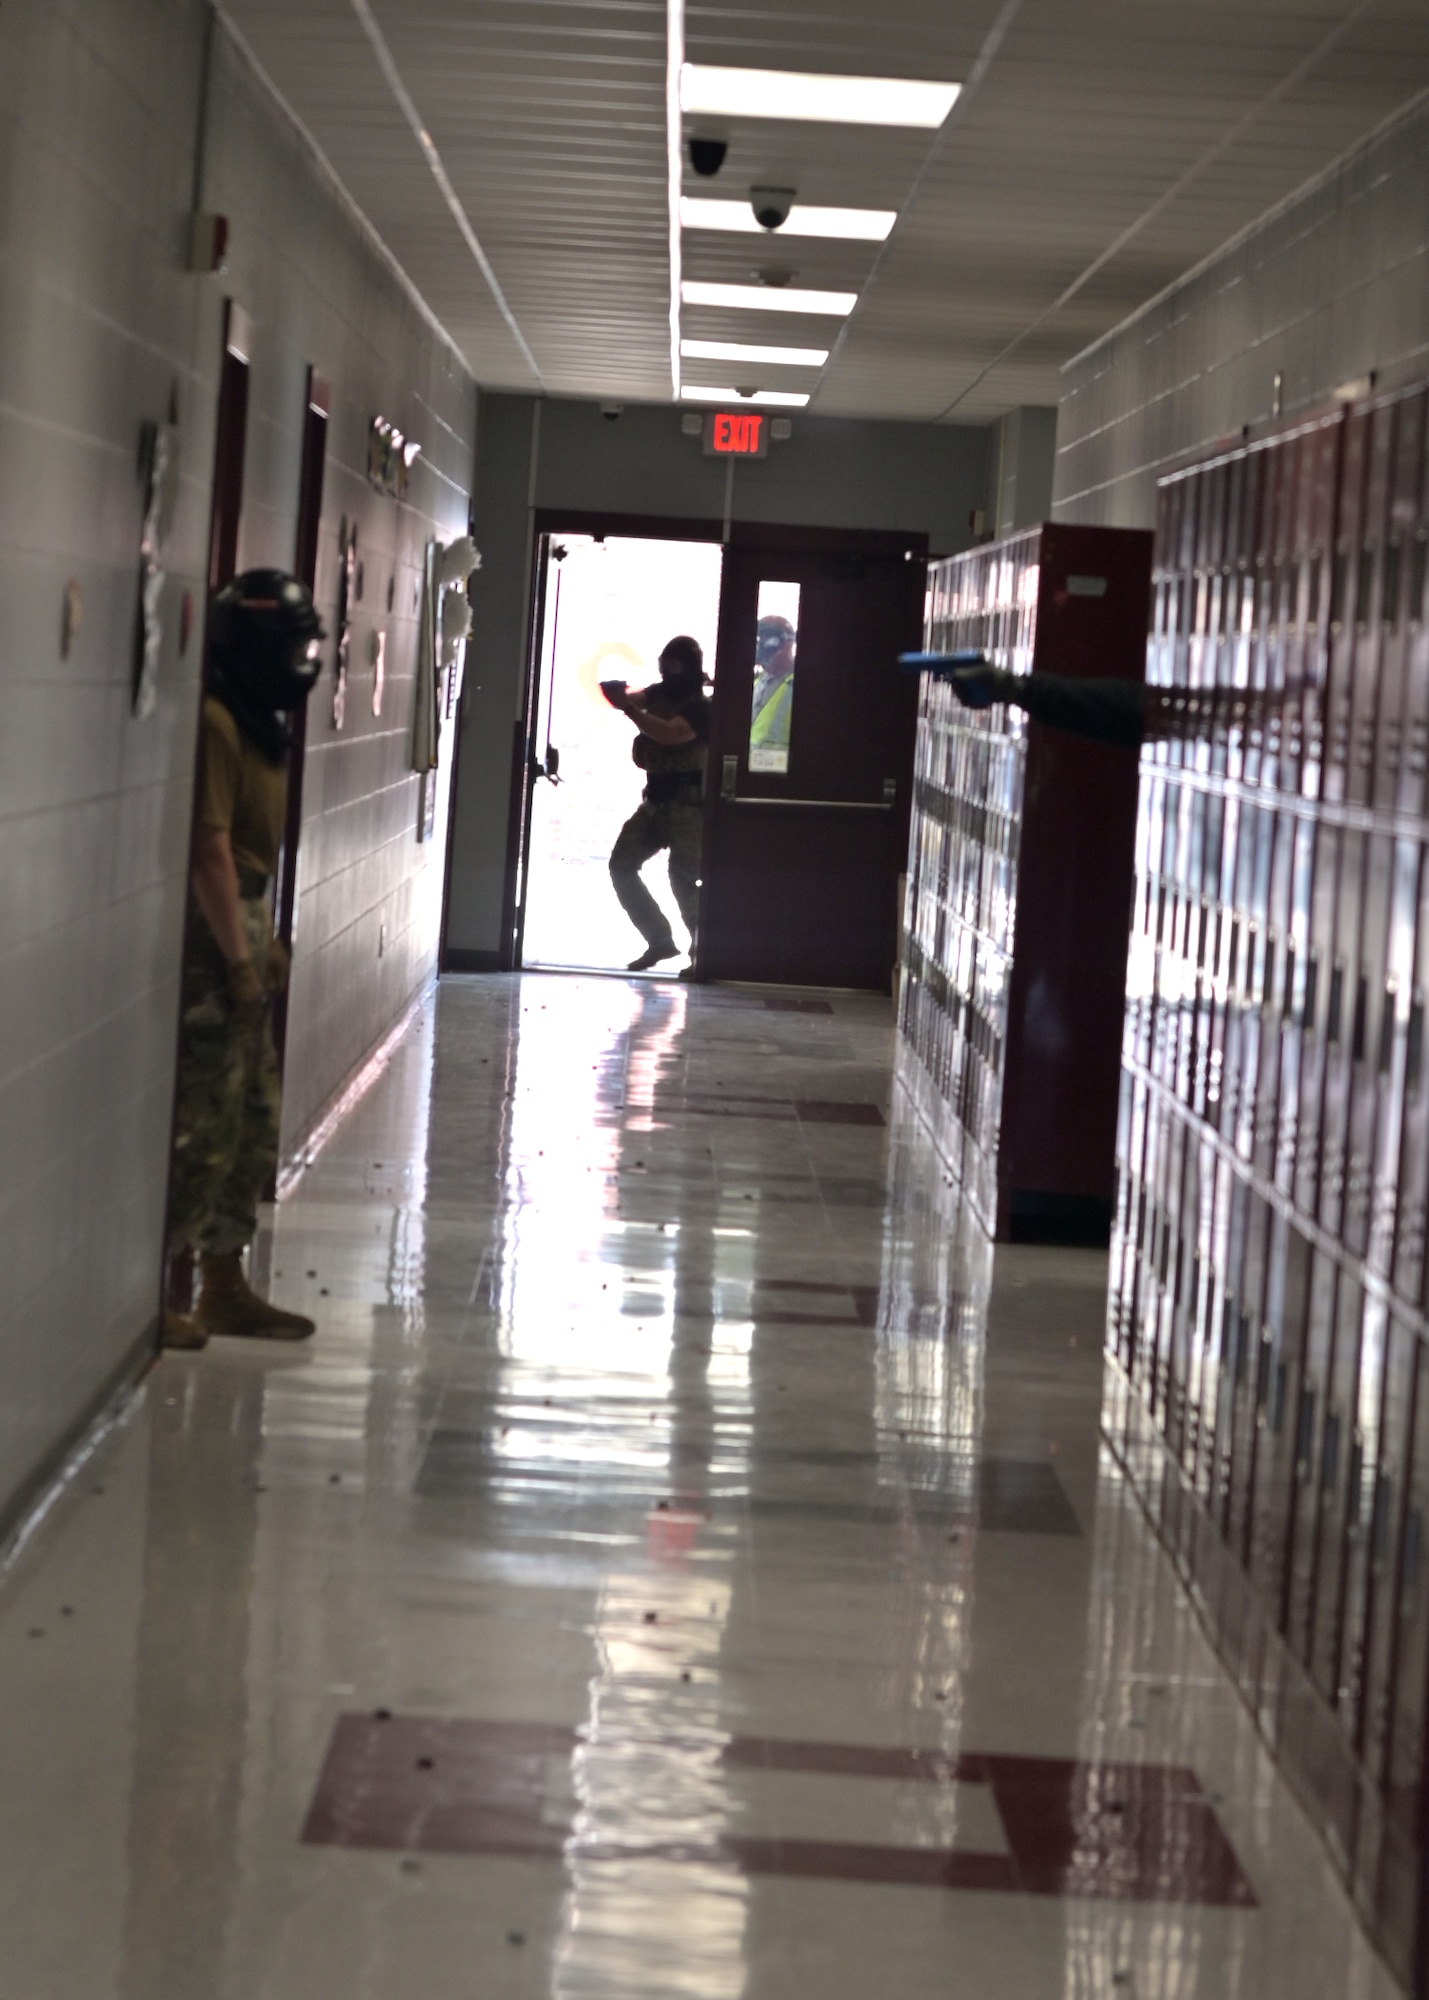 An ALERRT participant enters a school building to engage a simulated active shooter.